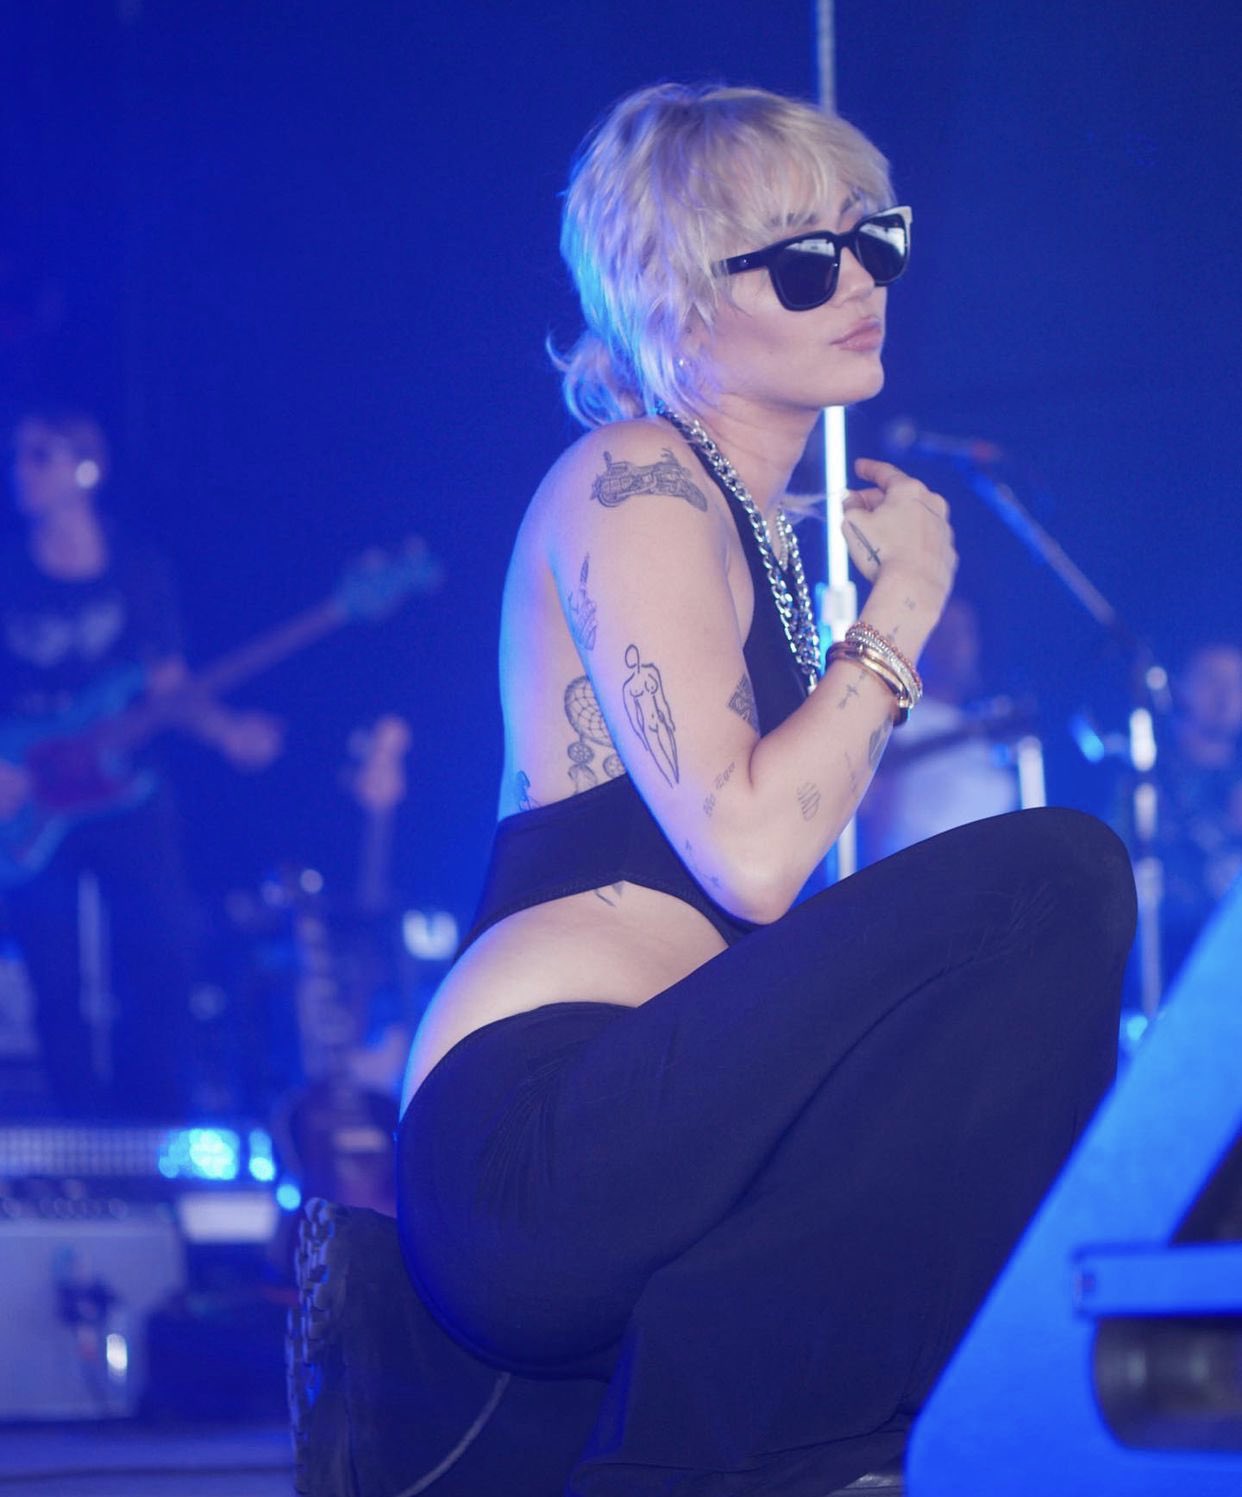 Miley Cyrus nearly had a panic attack at Milwaukee's Summerfest